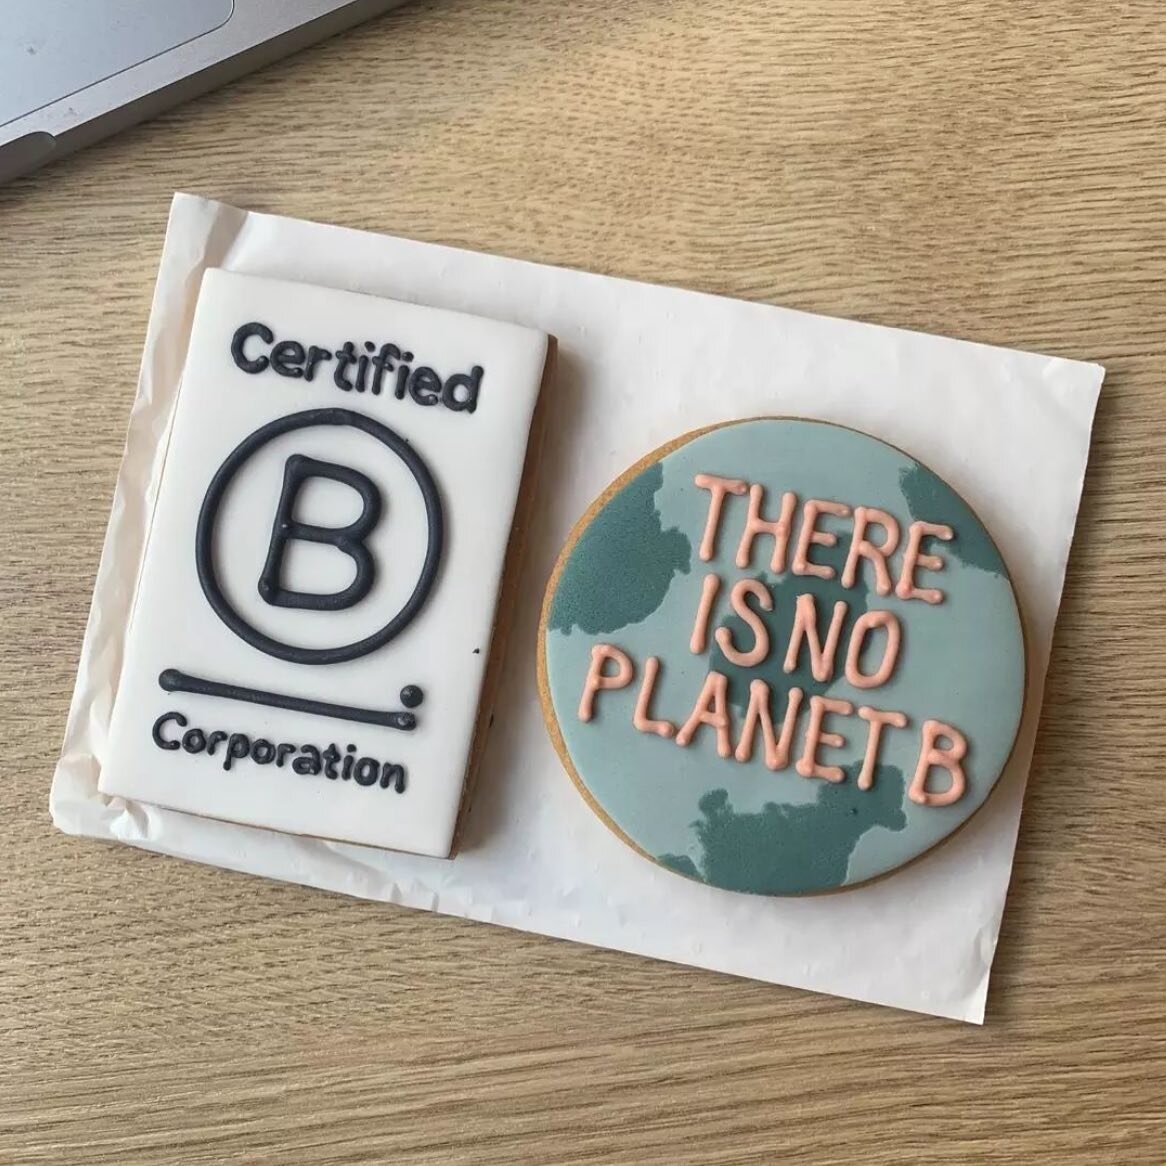 Spreading the B Corp love&nbsp;🌍&nbsp;🤝 

Standing with the #BCorpCommunity is so important to us! We are proud to be part of the global movement of B Corps&nbsp;🌿

@honeywellbakes thank you so much for our cute cookies 🍪